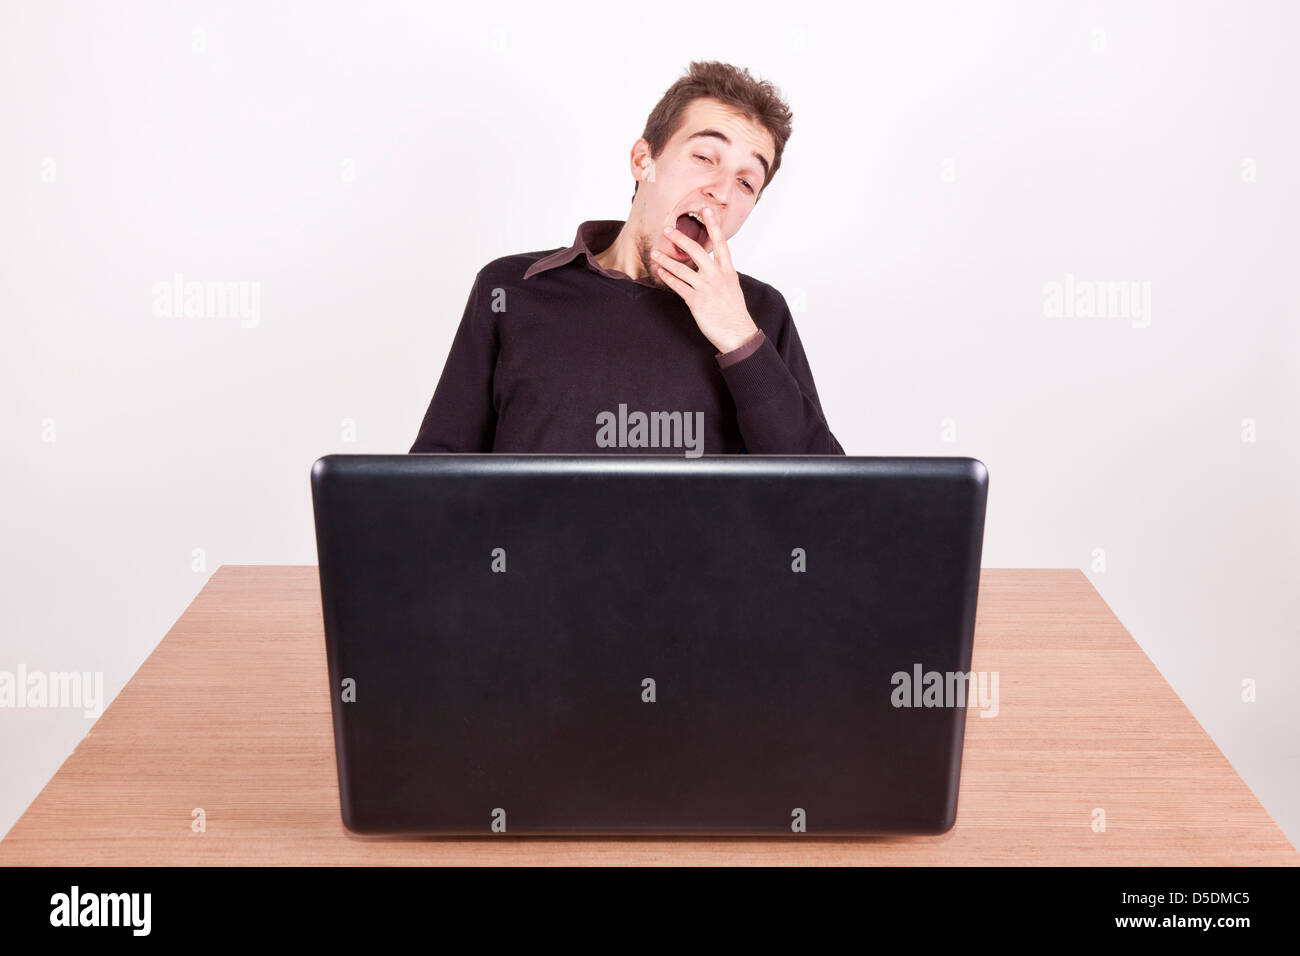 sleepy young man yawning at a desk with a laptop in front of him Stock Photo